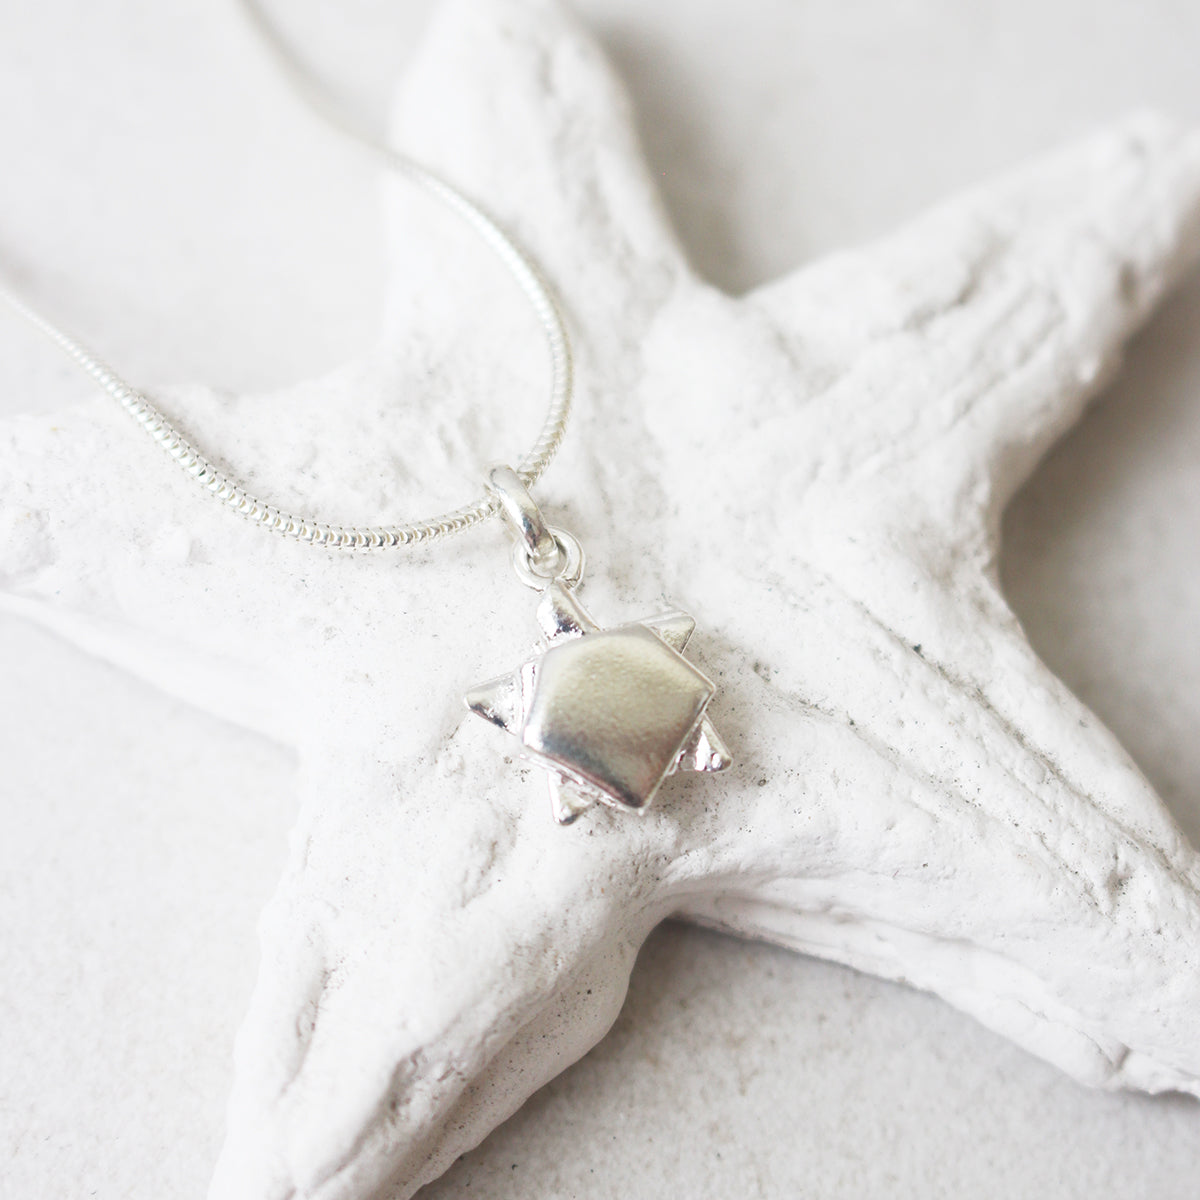 Silver Origami Small Turtle Necklace